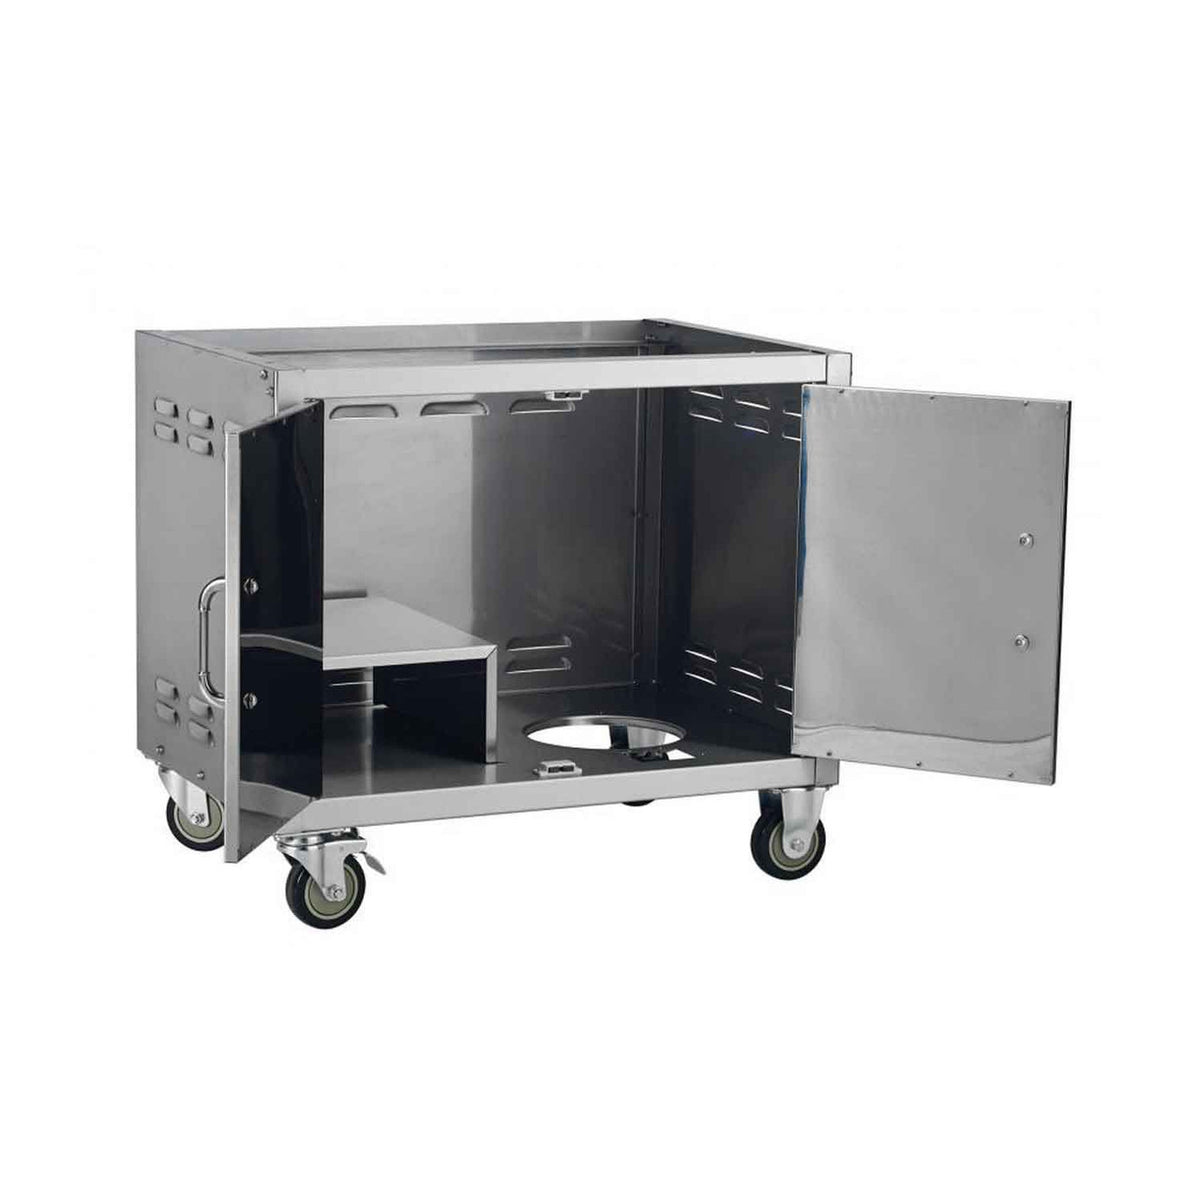 Bull Grill Cart for 30 Inch 4 Burner Gas Grill